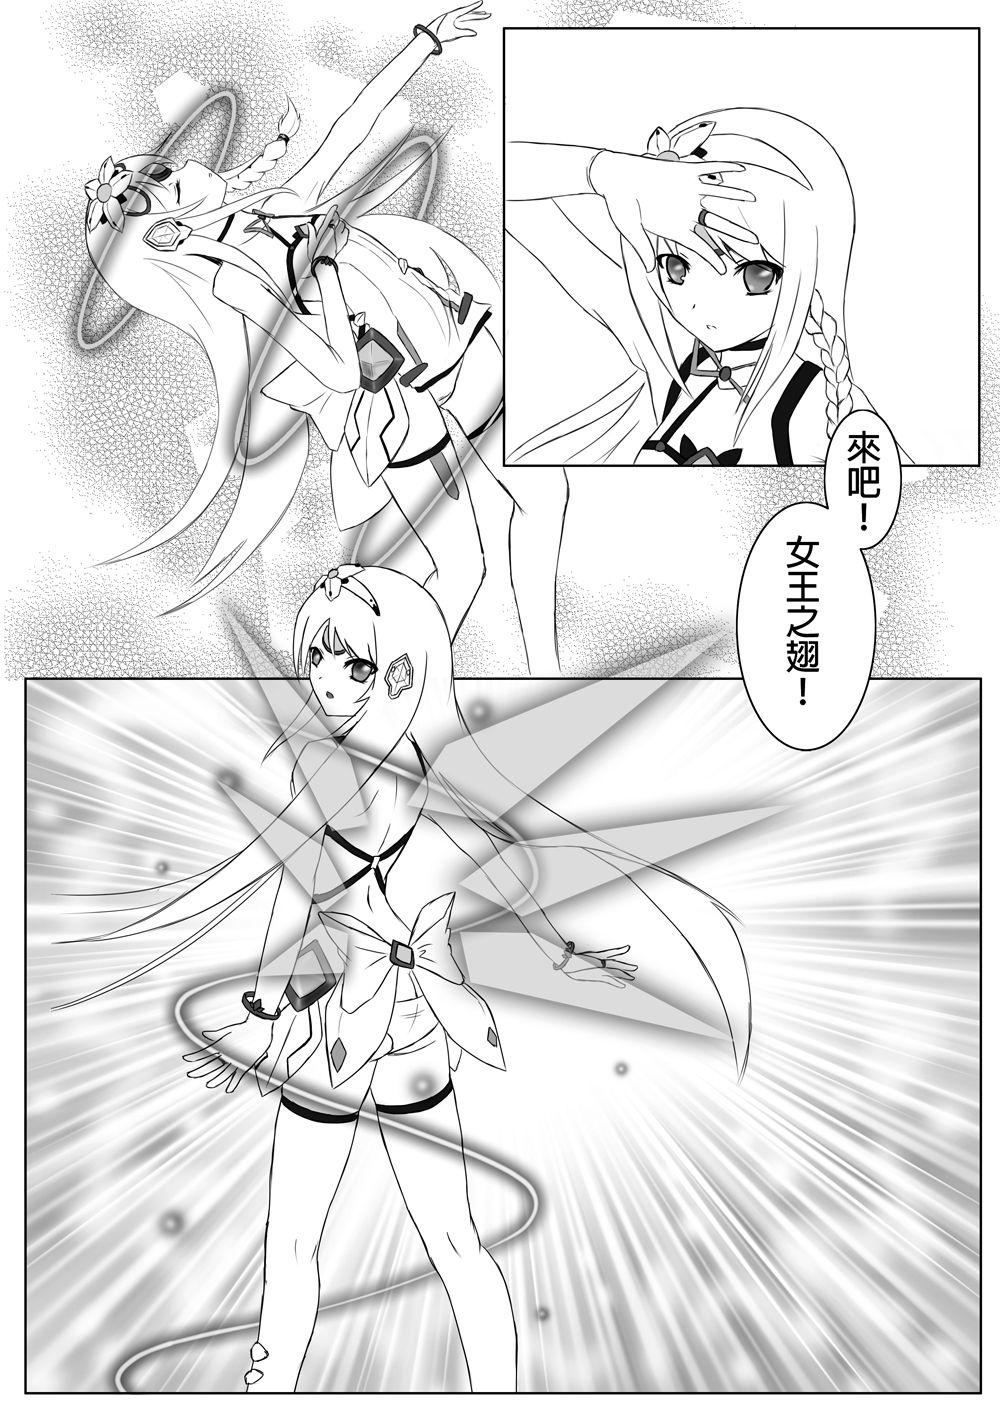 Chibola 人間遊戯 - Elsword Club - Page 4